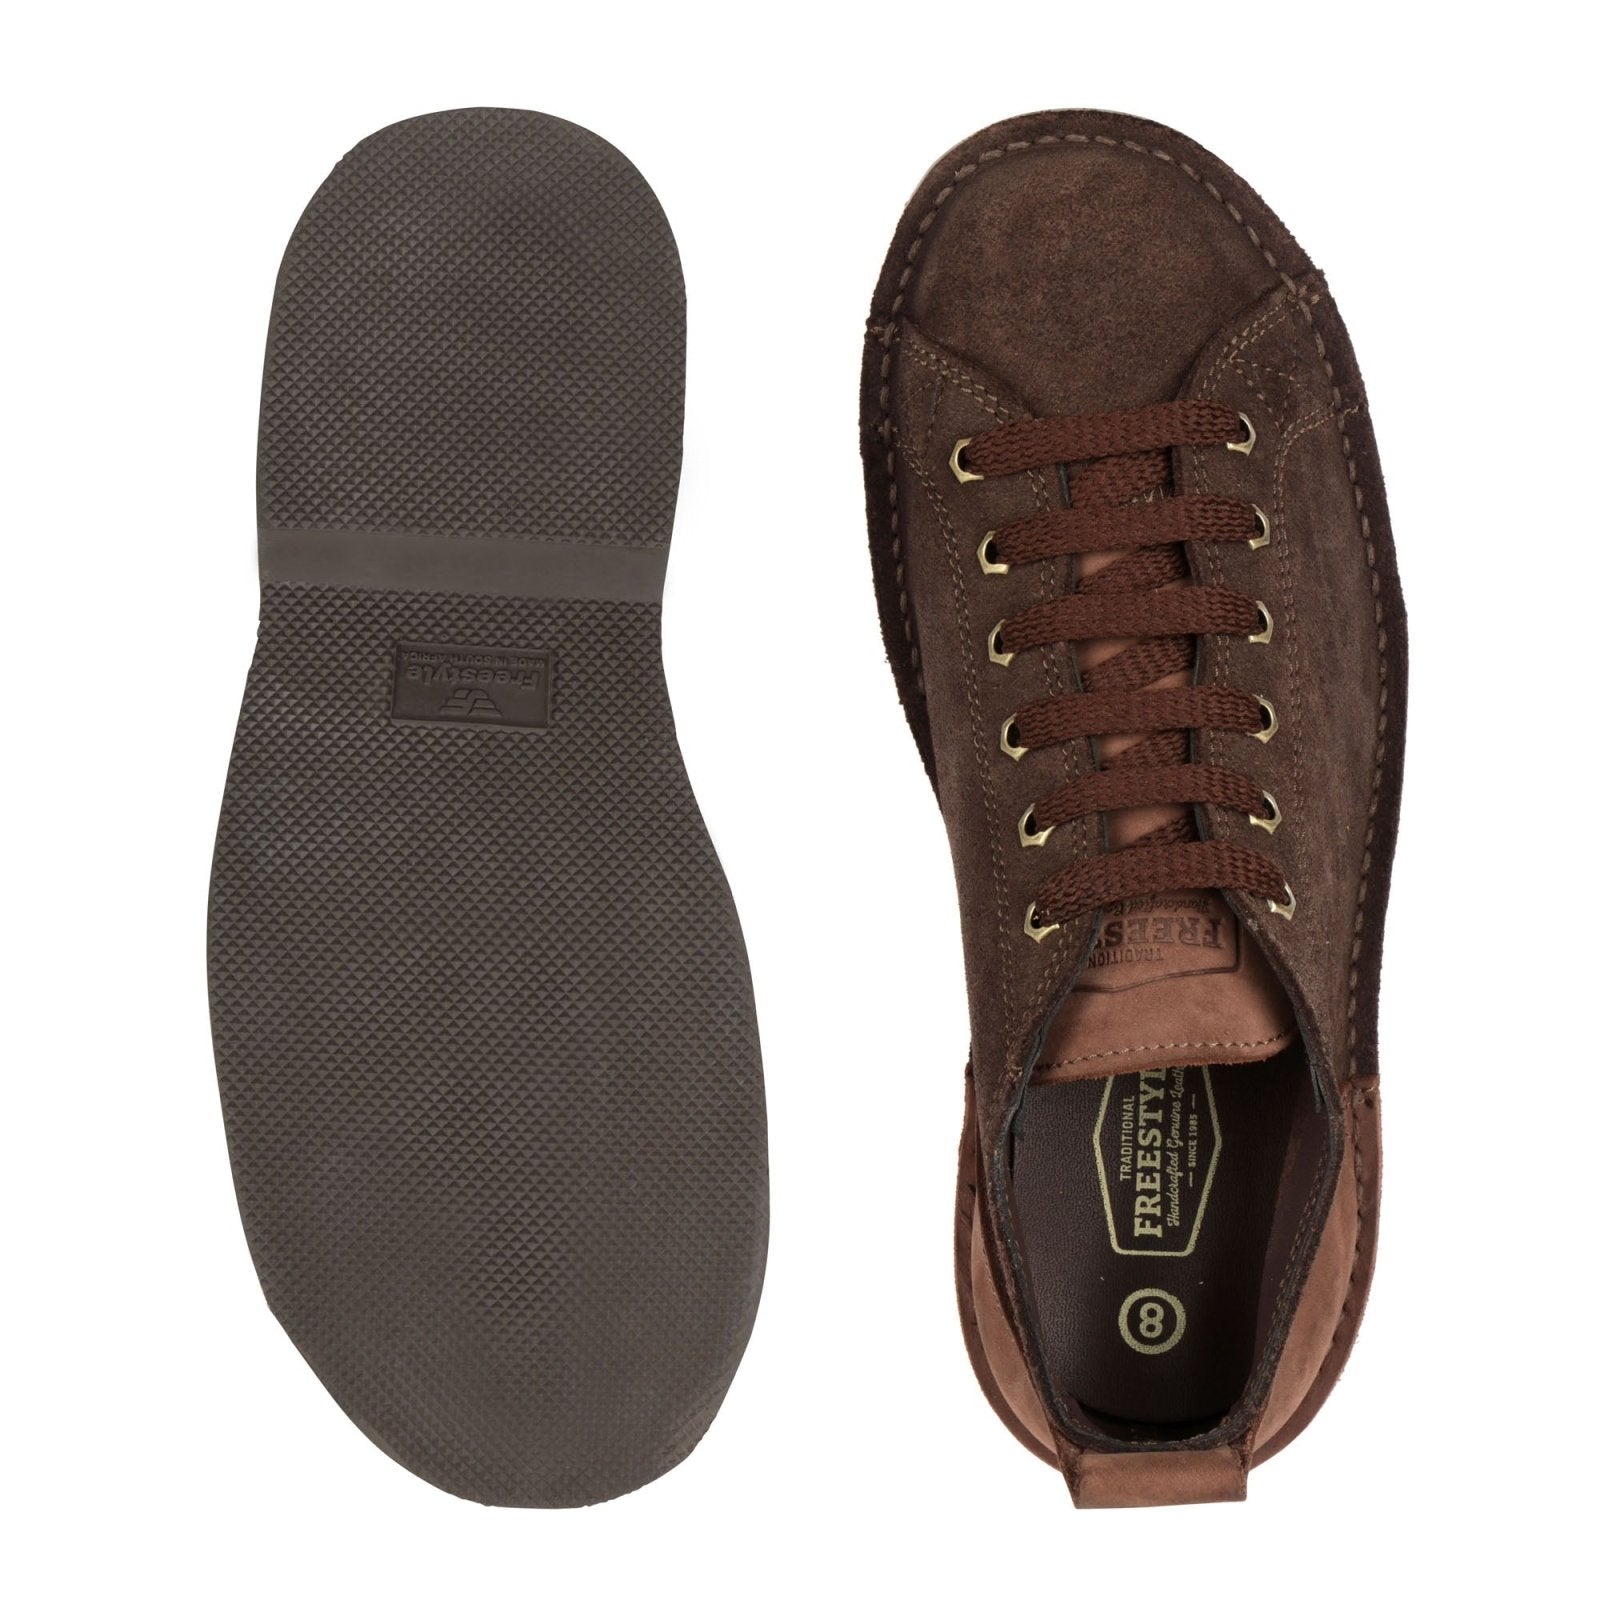 Alexander Premium Suede leather Takkie Veldskoen - Freestyle SA Proudly local leather boots veldskoens vellies leather shoes suede veldskoens